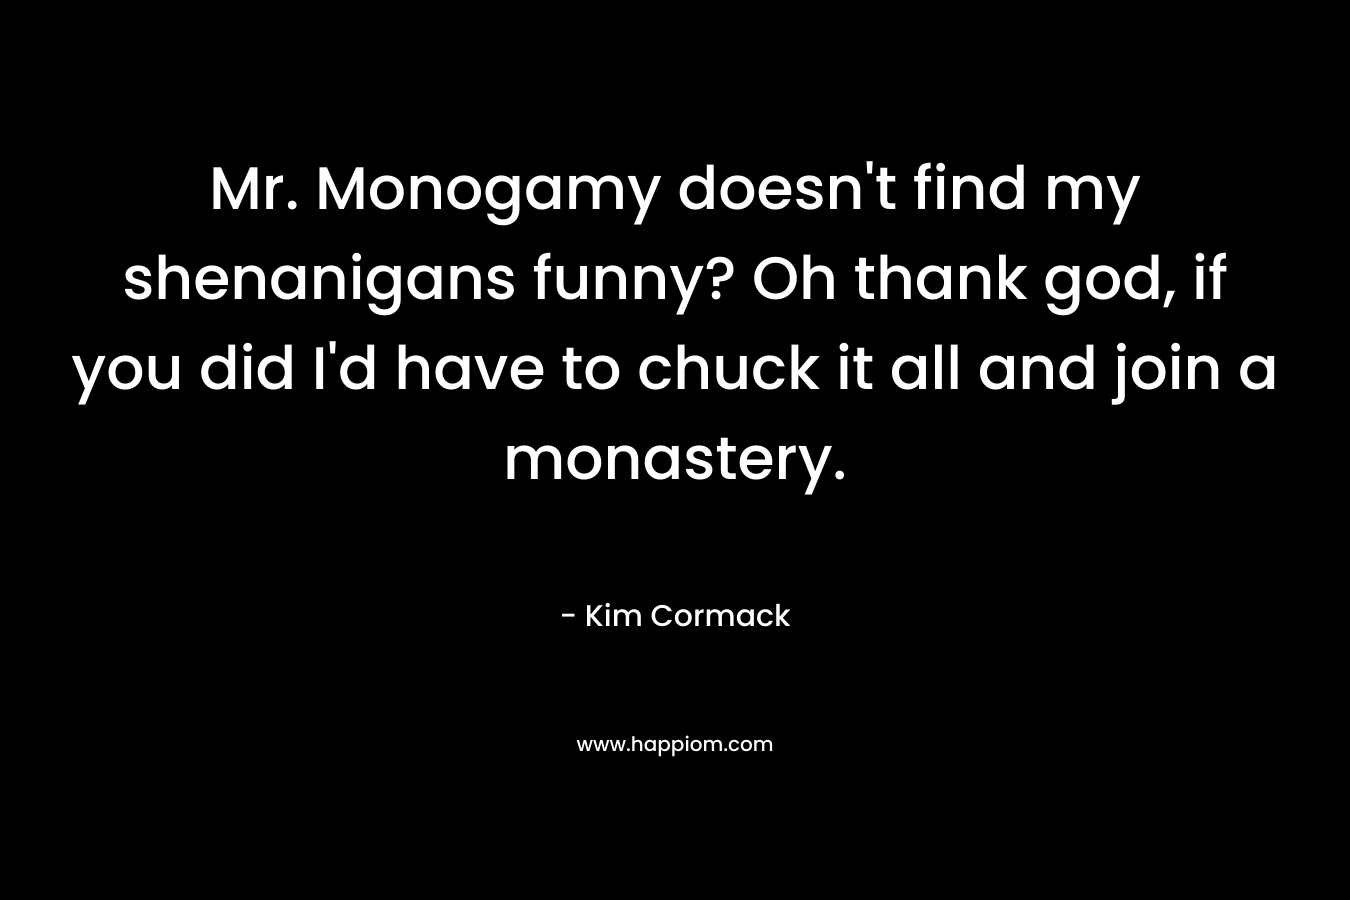 Mr. Monogamy doesn’t find my shenanigans funny? Oh thank god, if you did I’d have to chuck it all and join a monastery. – Kim Cormack